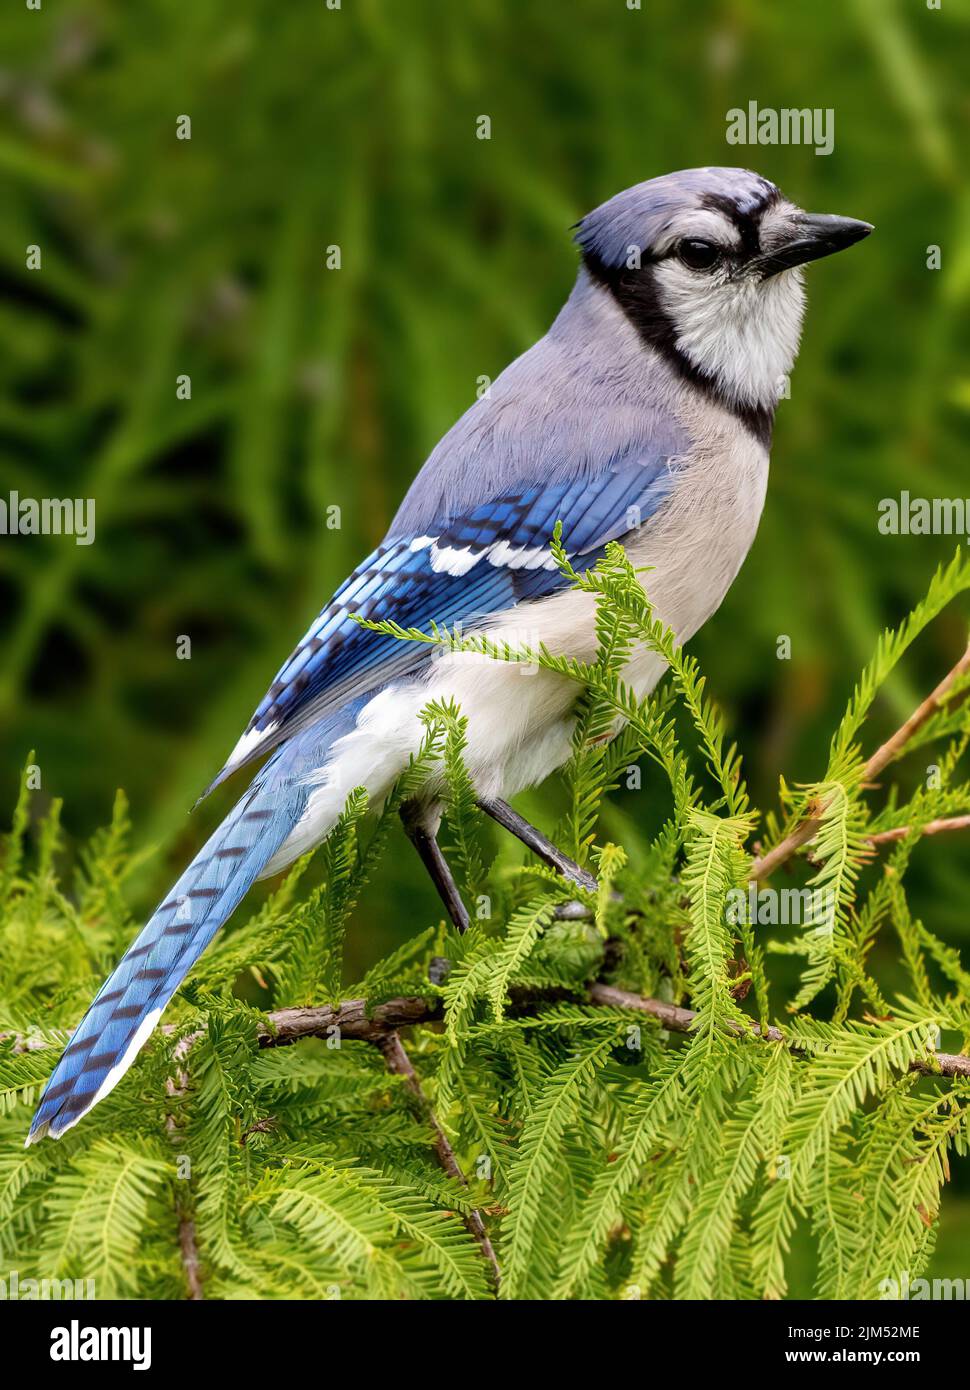 A closeup shot of a Blue Jay bird standing on a green leaf branch in daylight with a green blurred background in the Florida wetland Stock Photo